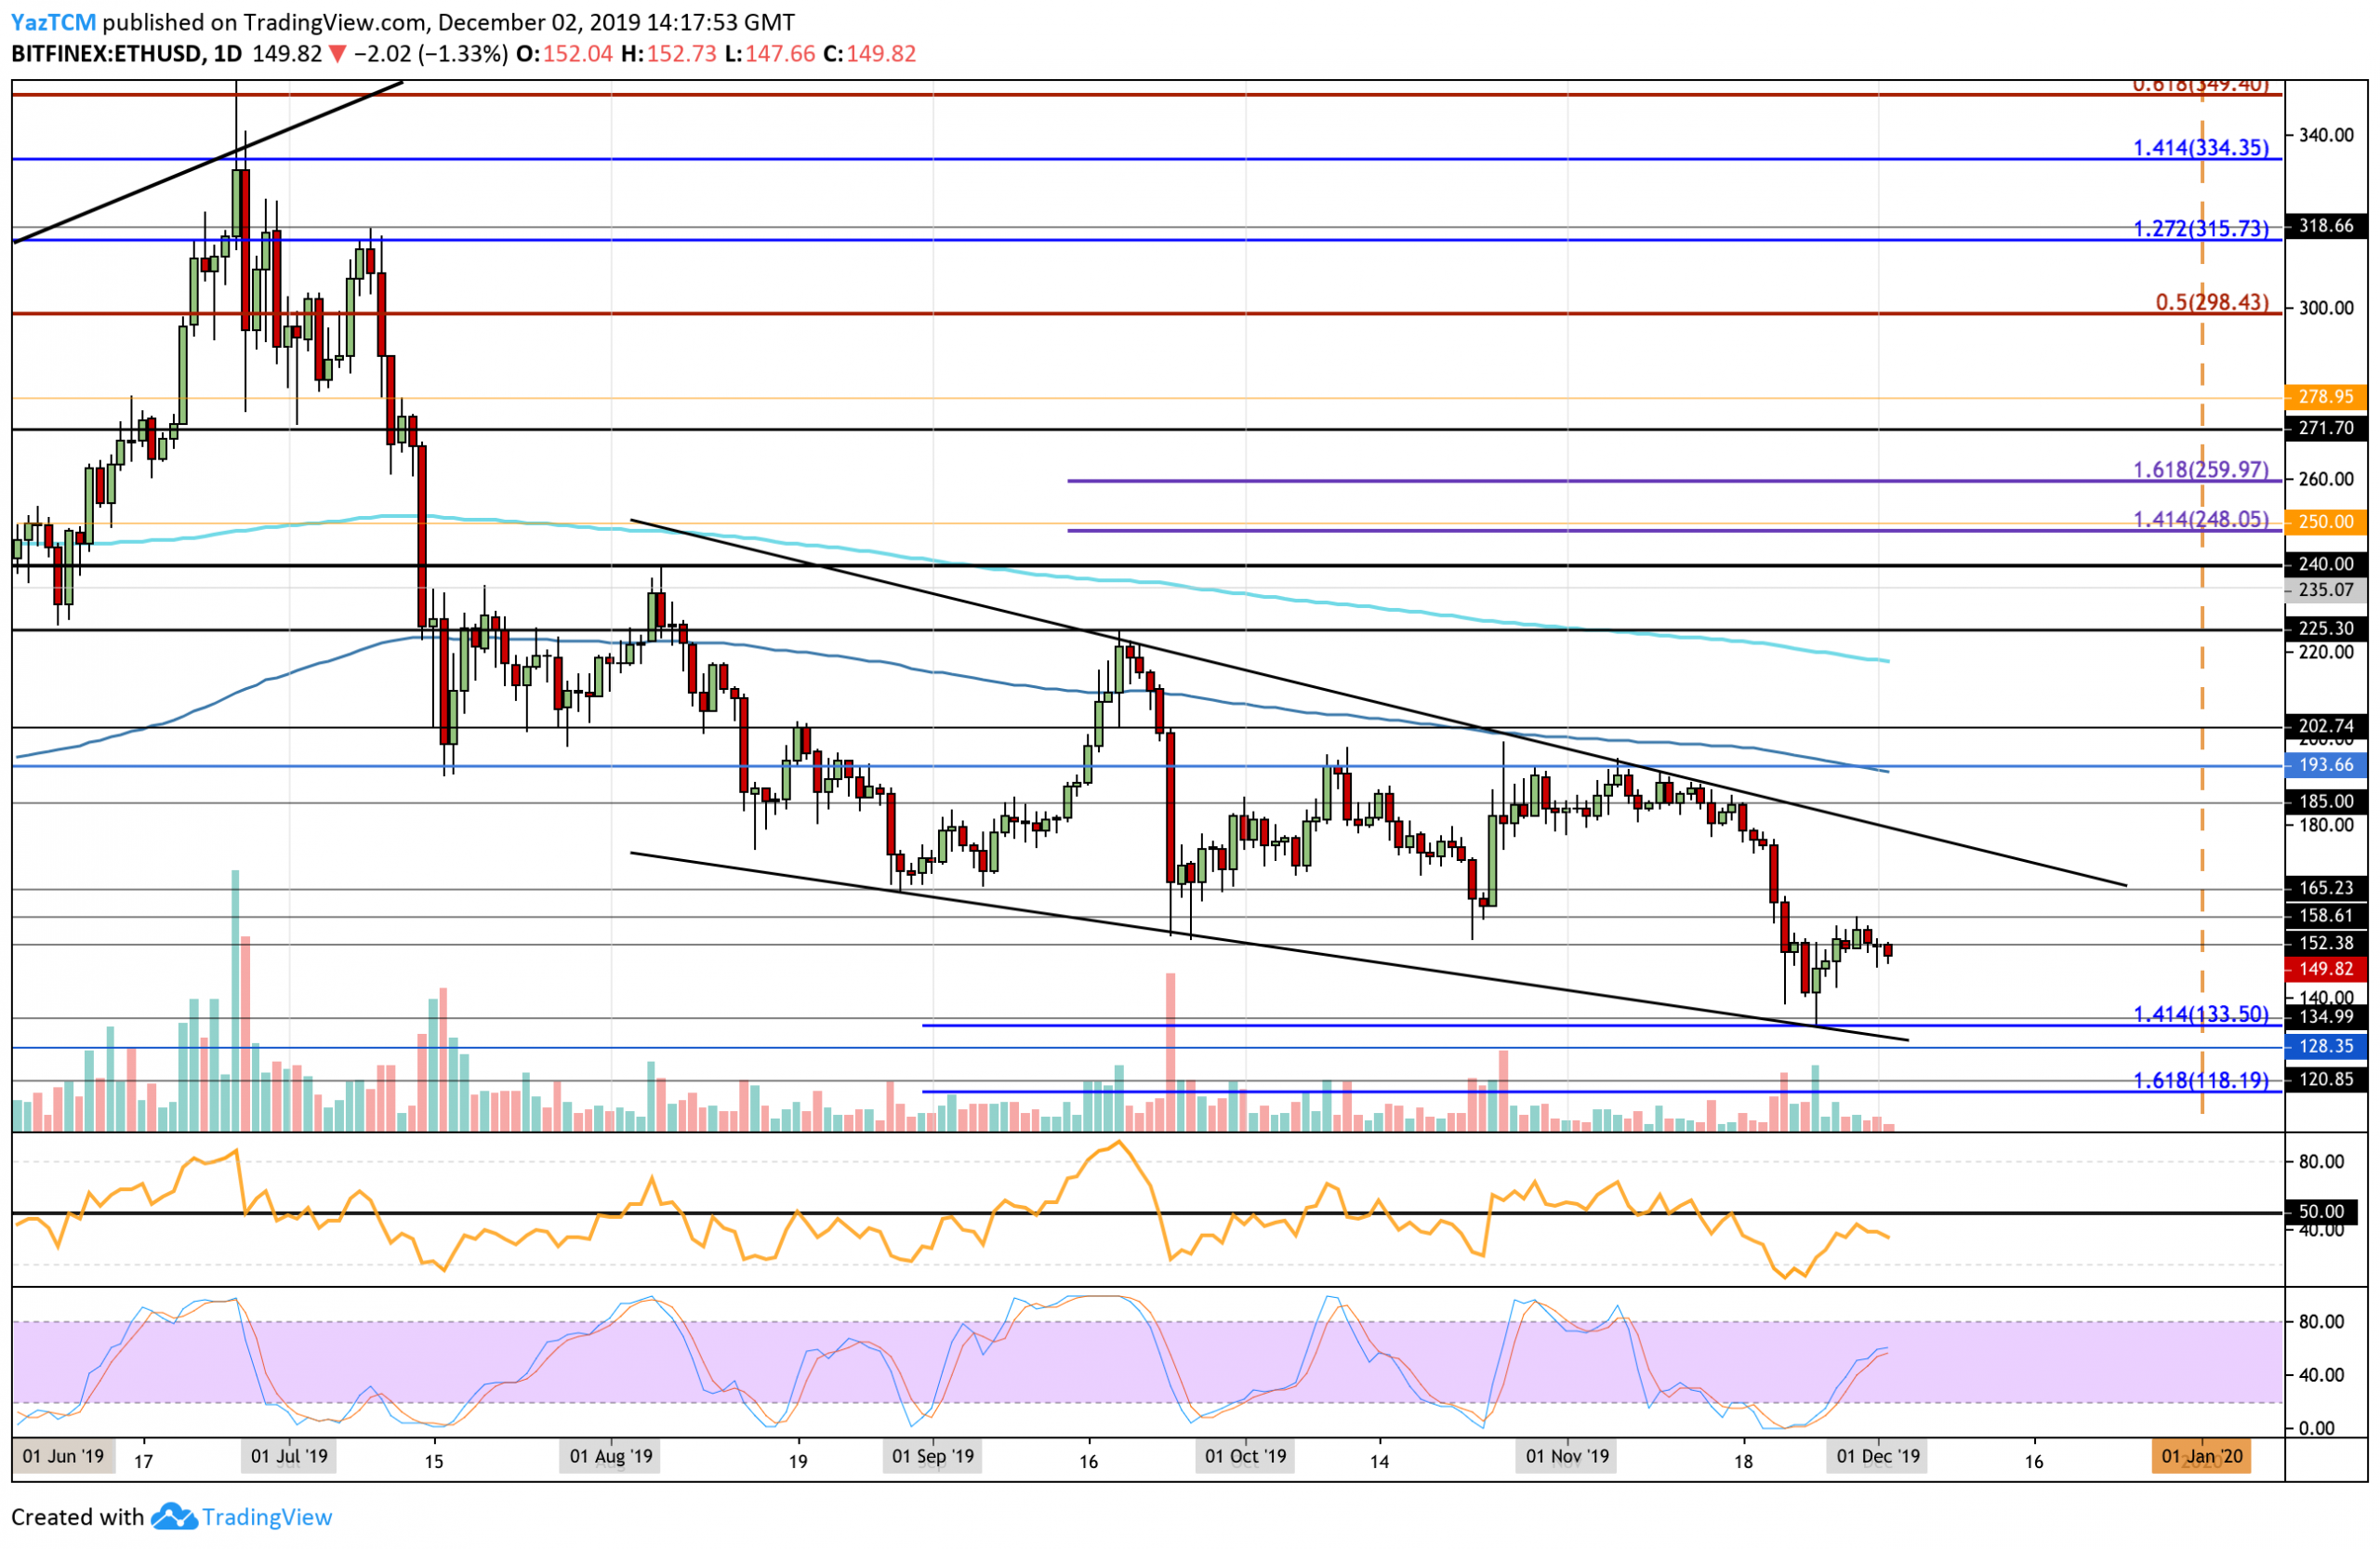 Ethereum Price Analysis: ETH Looks To Slip Lower After Struggling Below $150